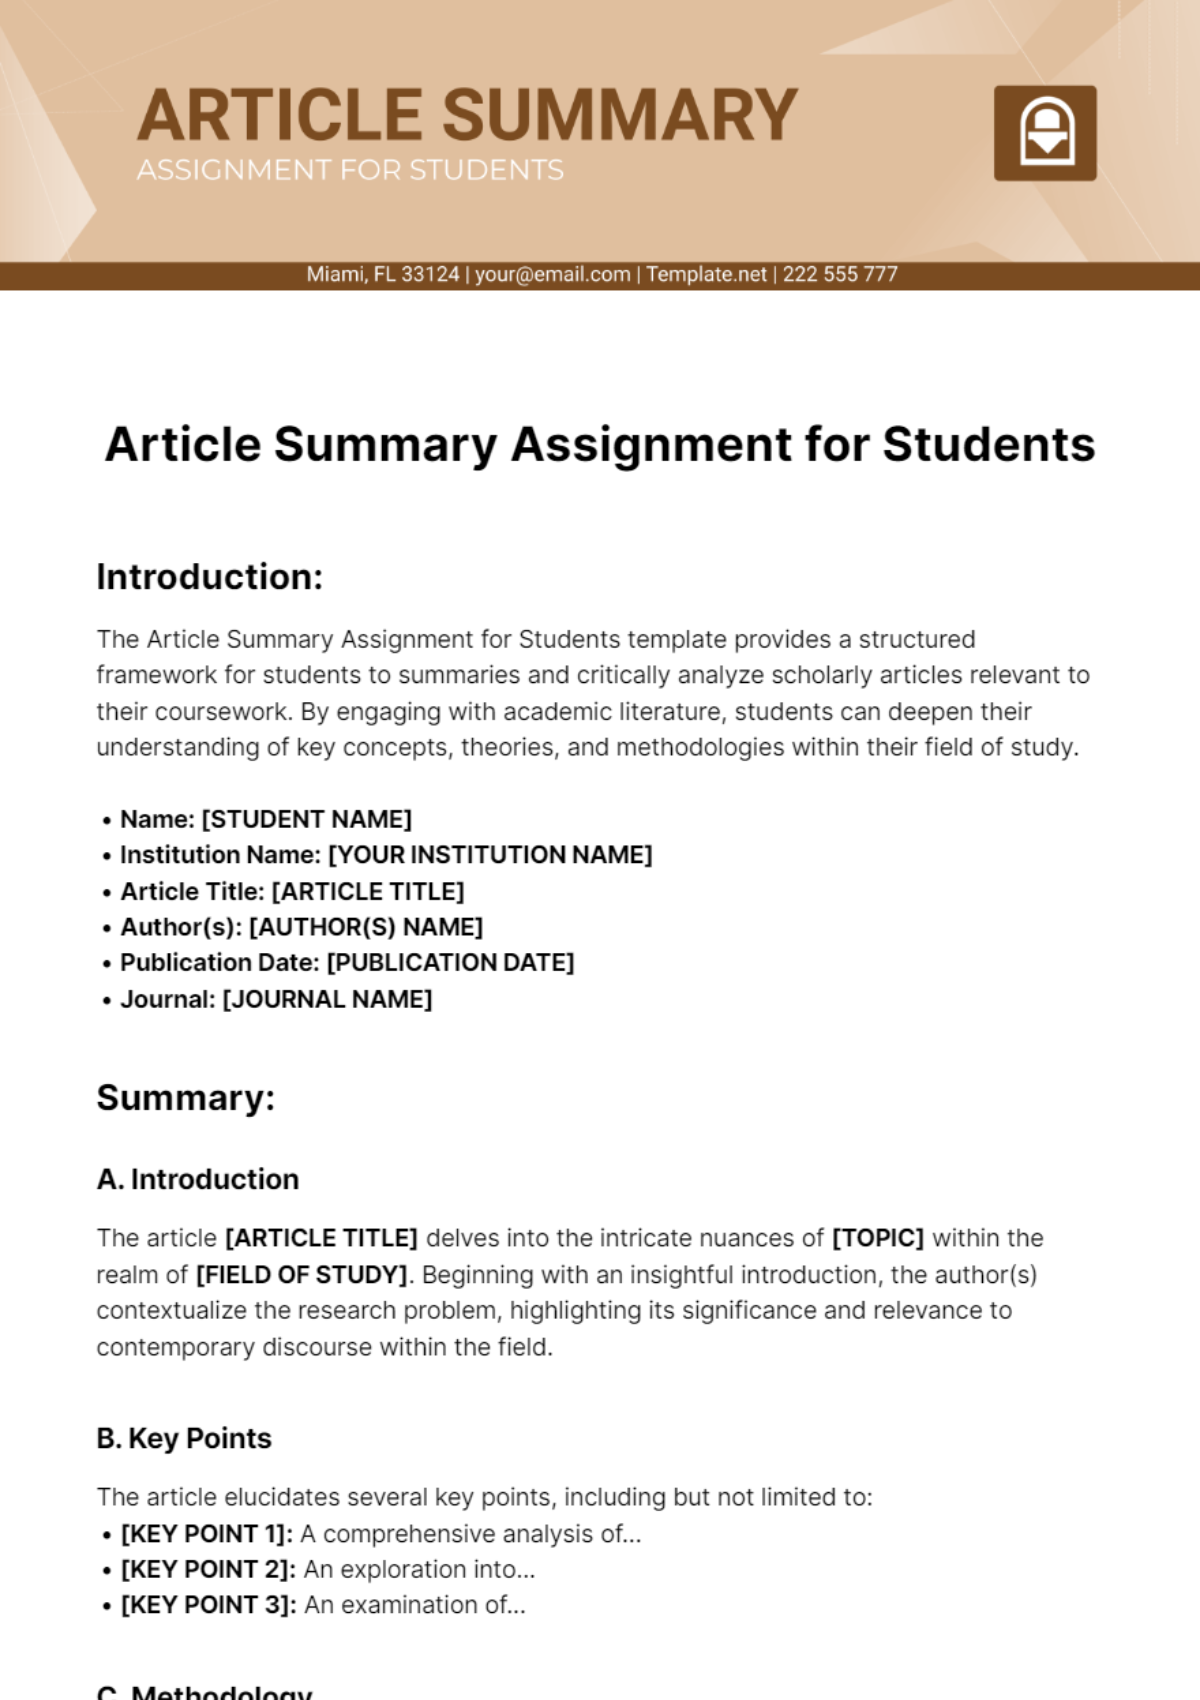 Free Article Summary Assignment for Students Template